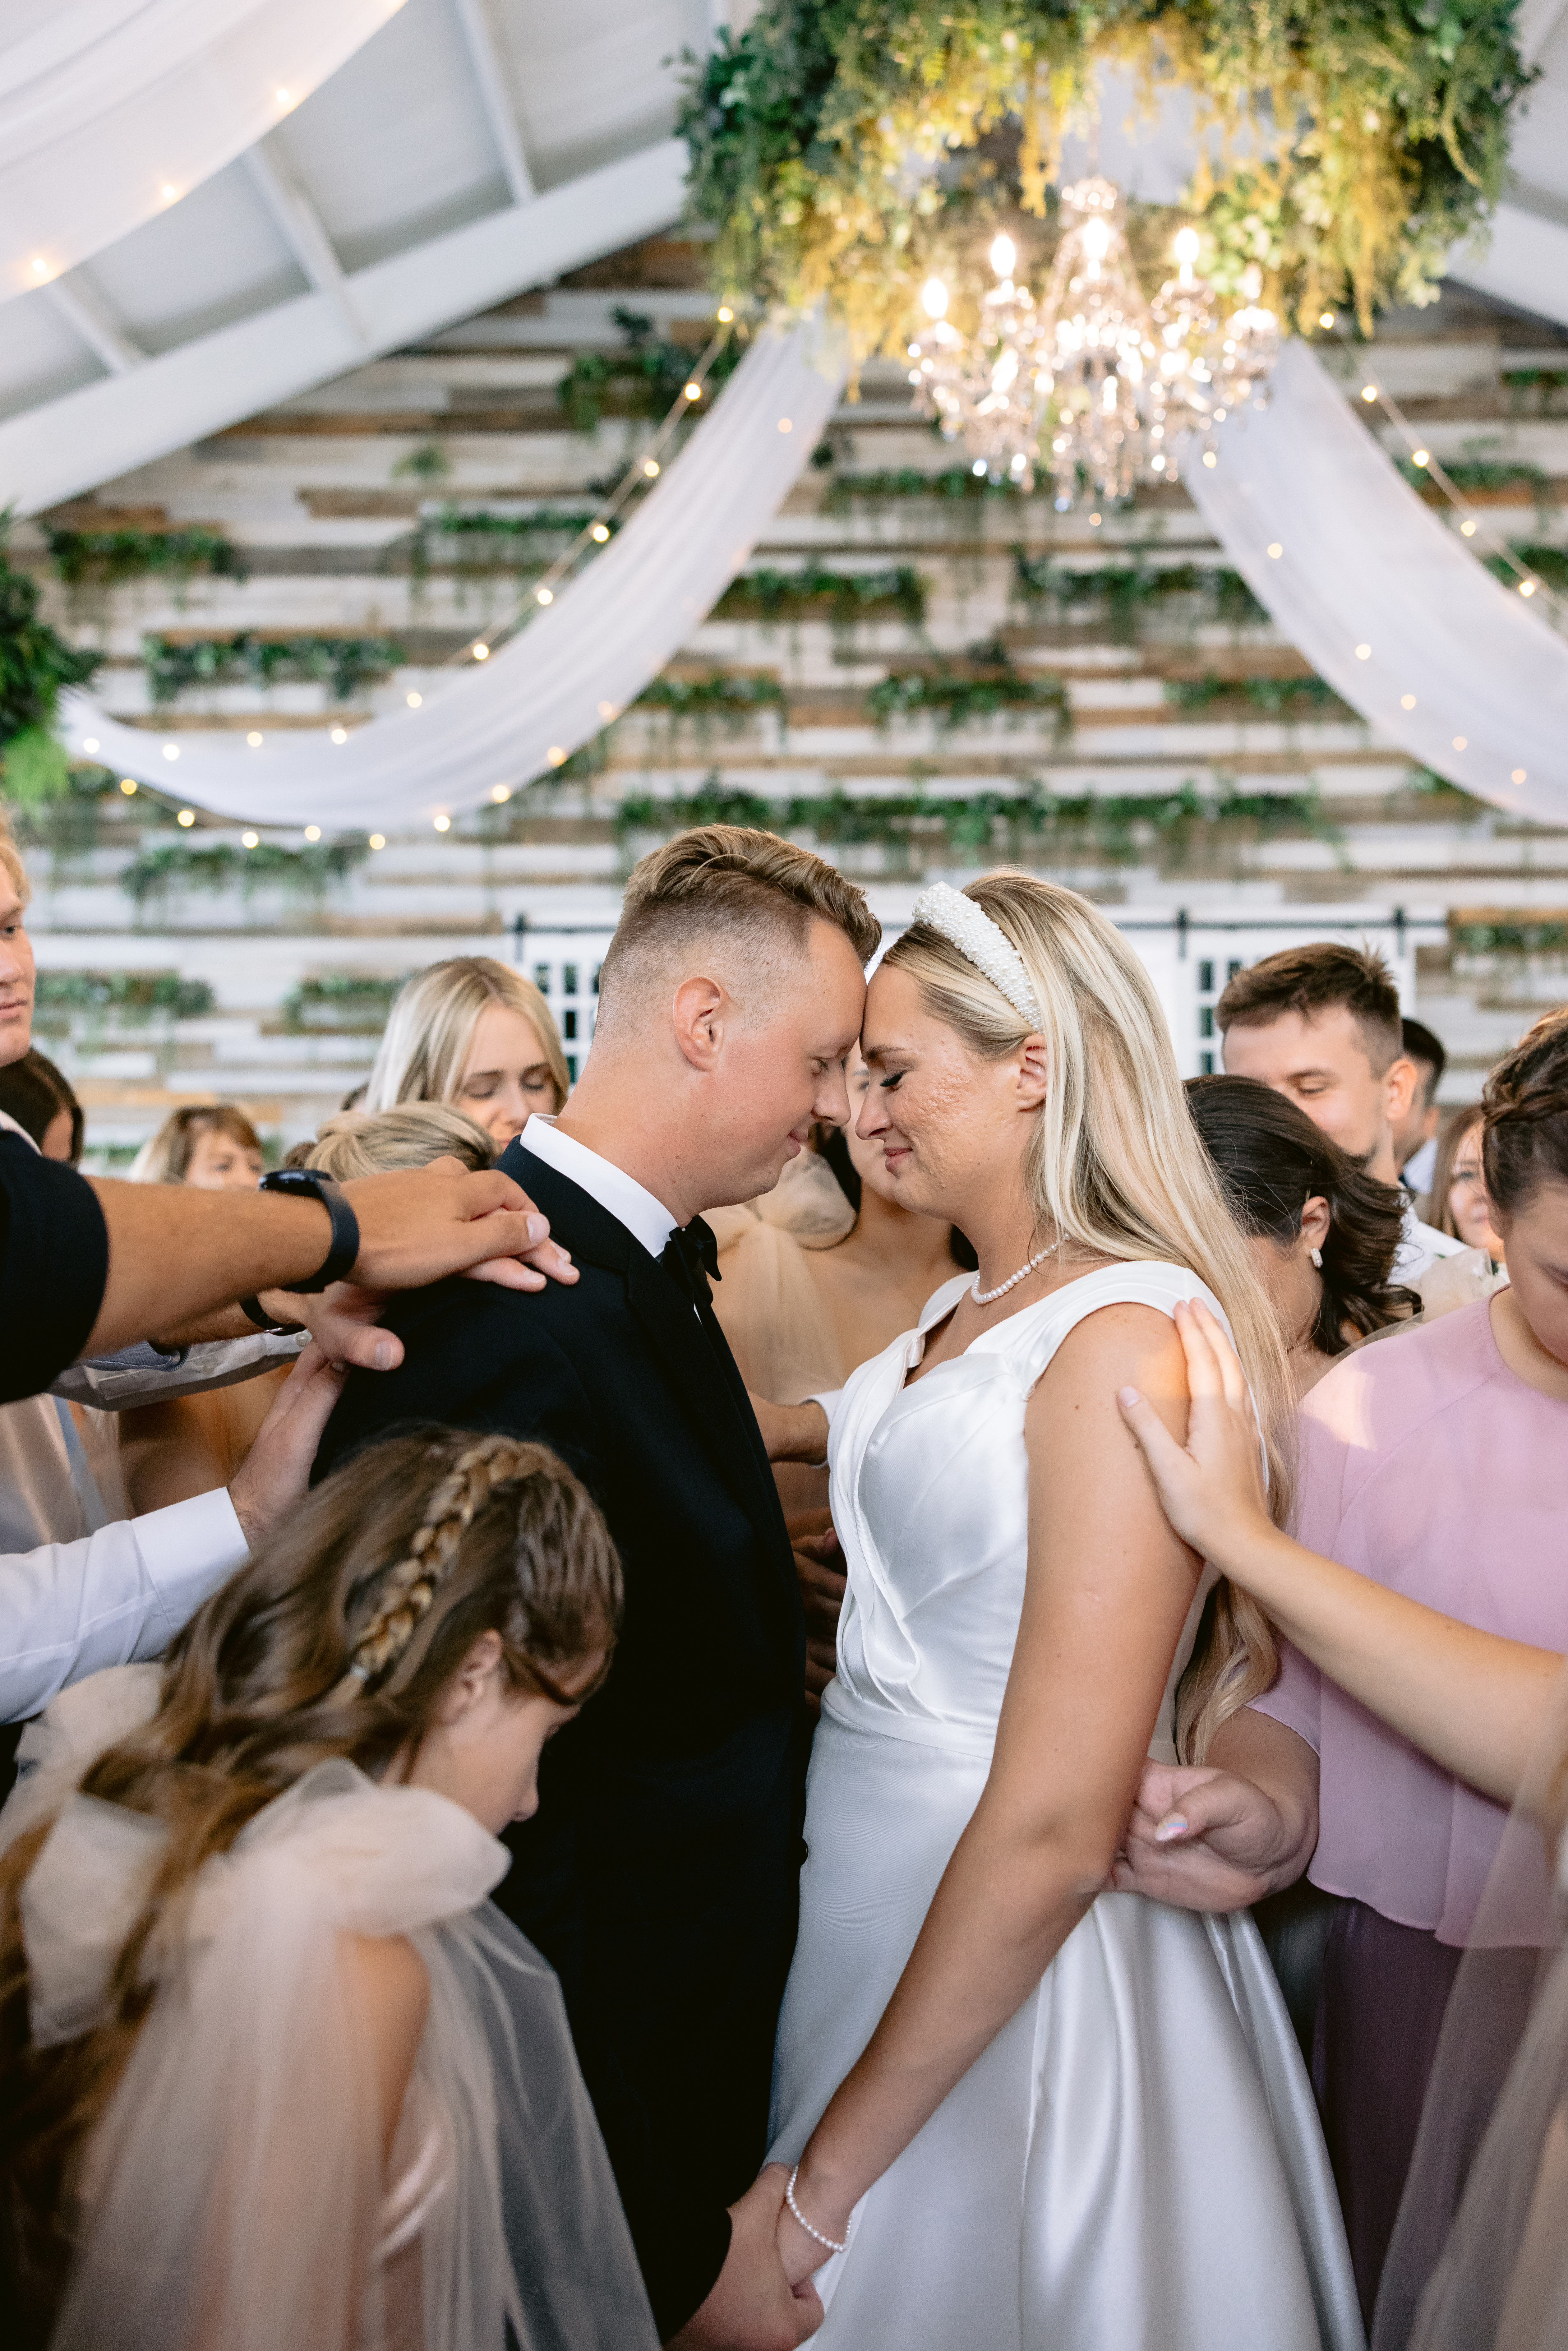 Bride and groom getting prayed over at the Greenhouse Two Rivers photographed by Tatyana Zadorin Photography